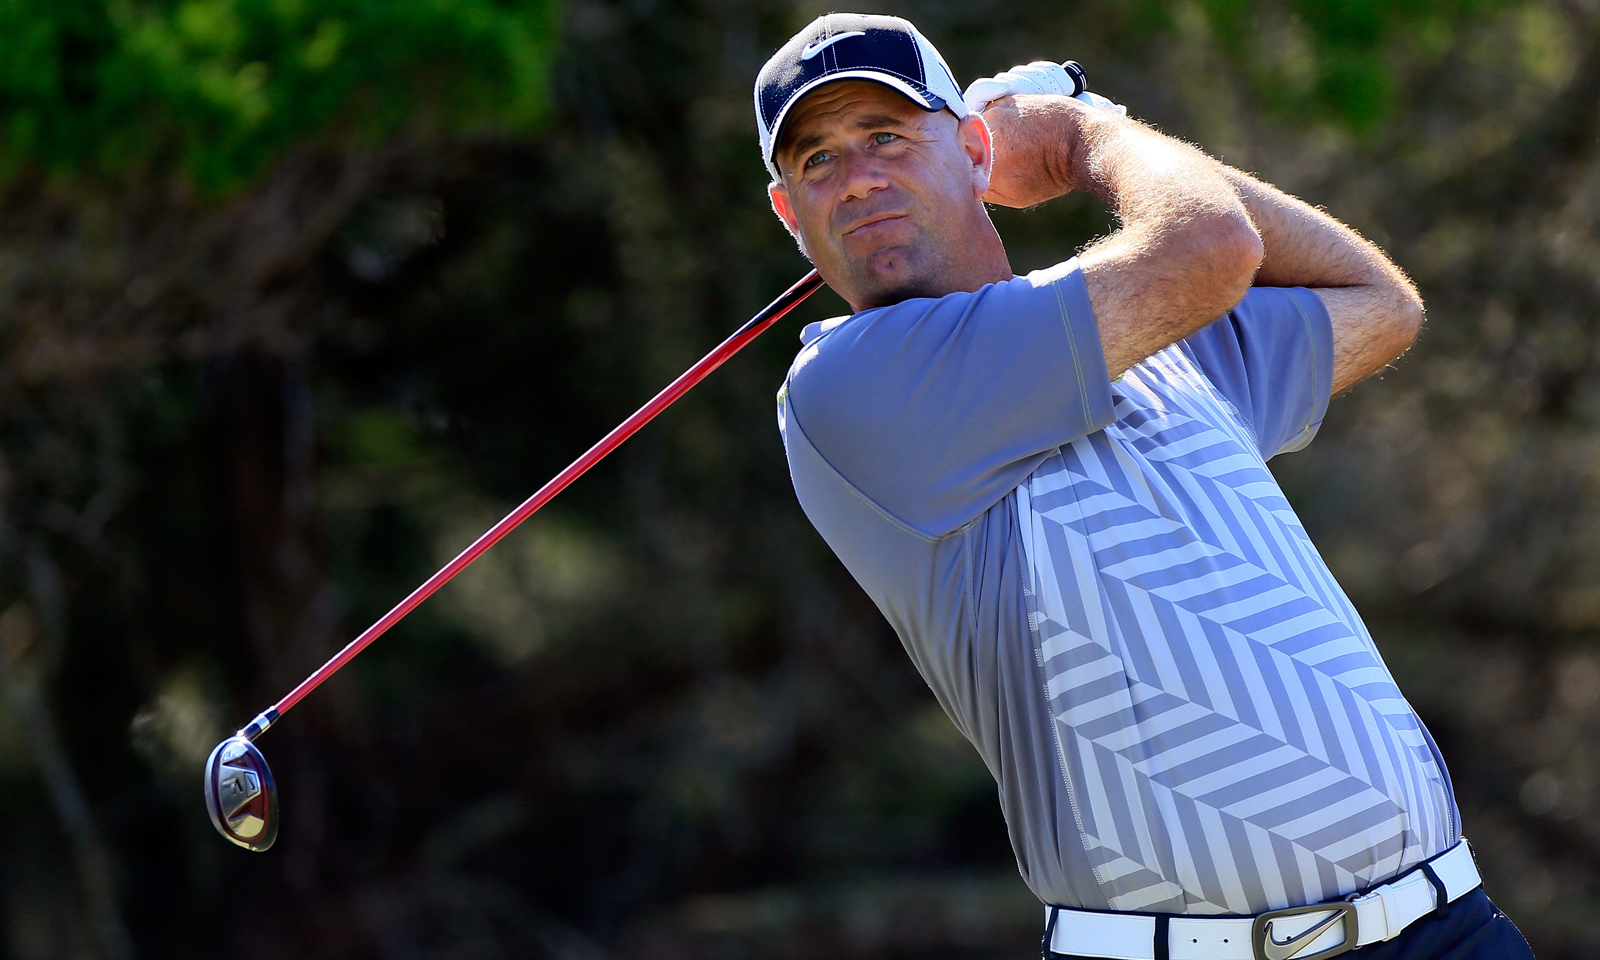 Stewart Cink previews TPC Sugarloaf’s freshly spruced up Pines course in an exclusive gallery showcase event